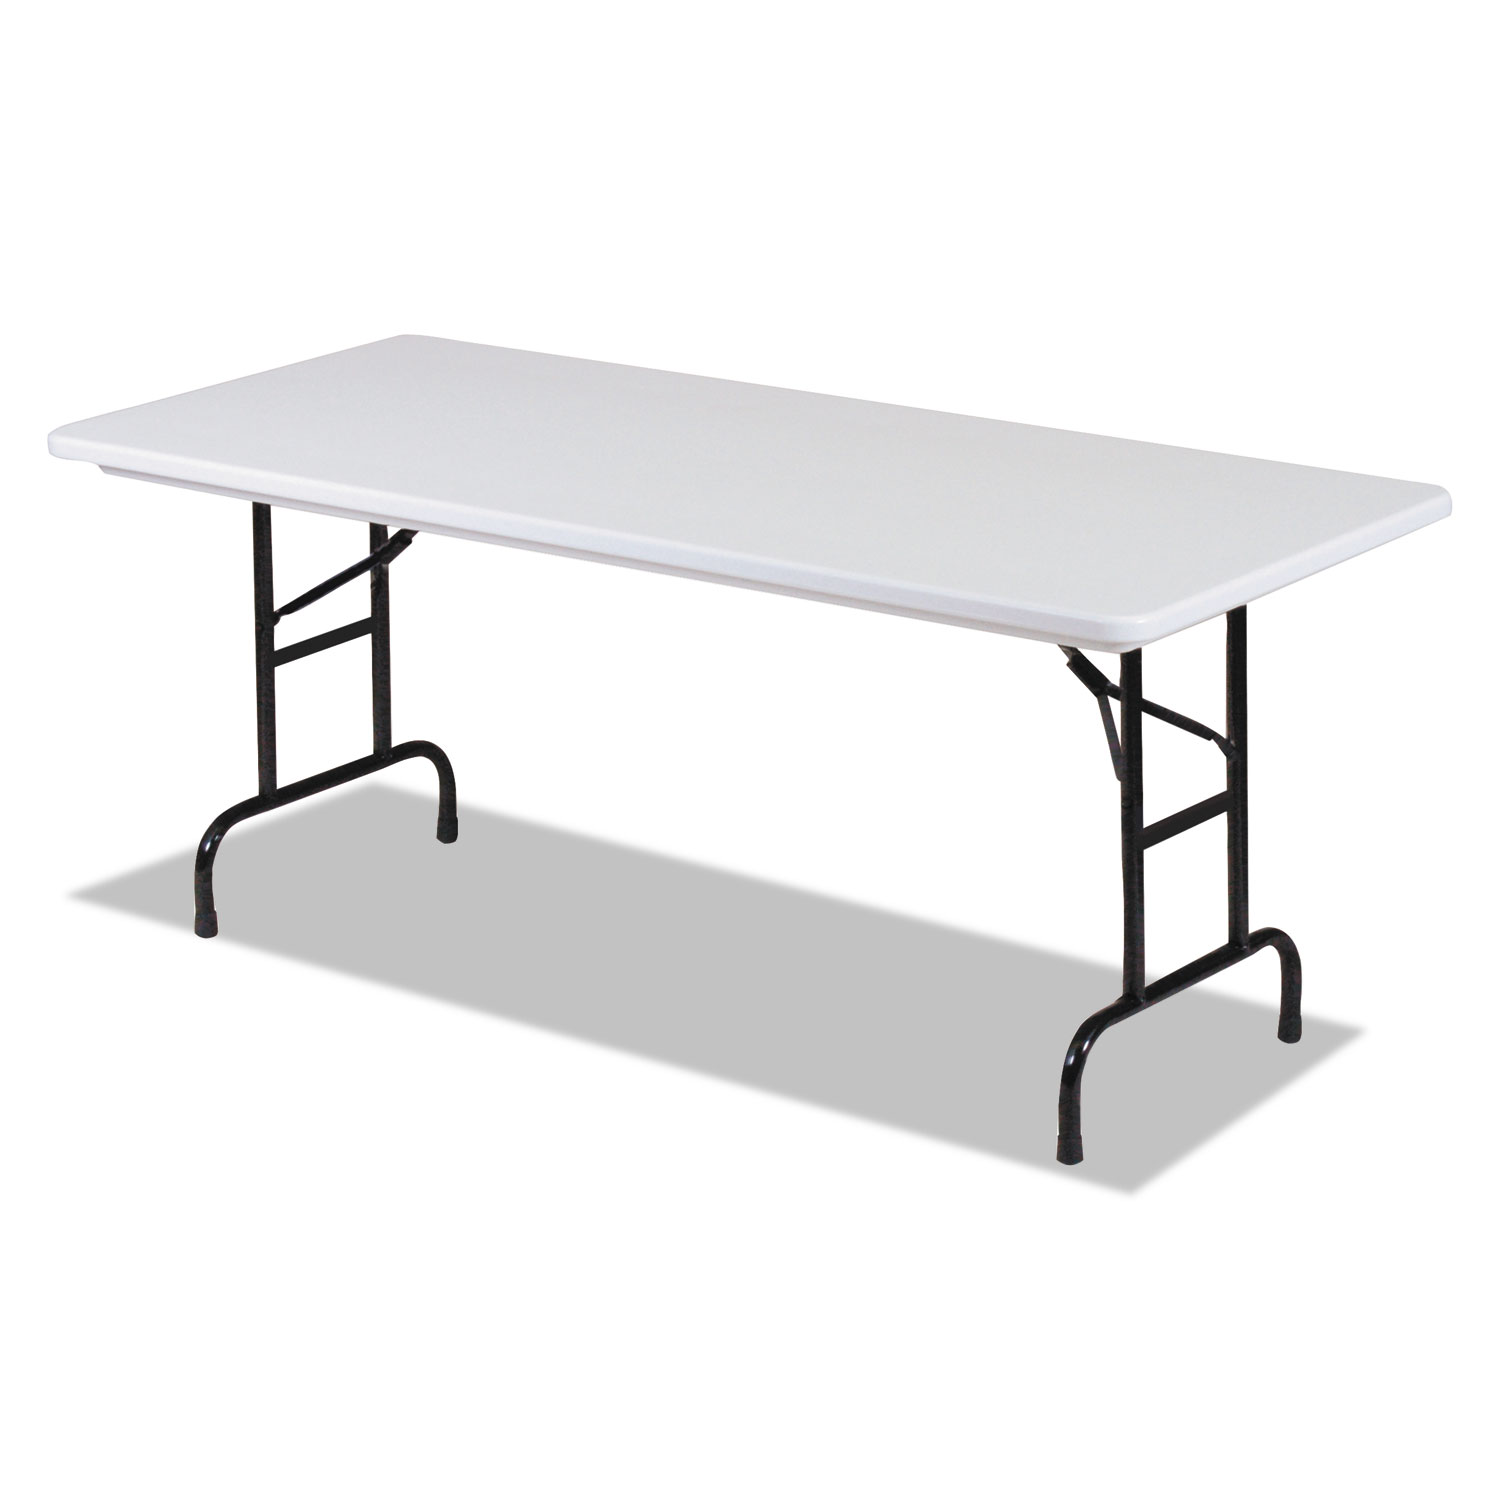 Blow Molded Resin Top Folding Tables, 60w x 30d x 22-32h, Gray Granite